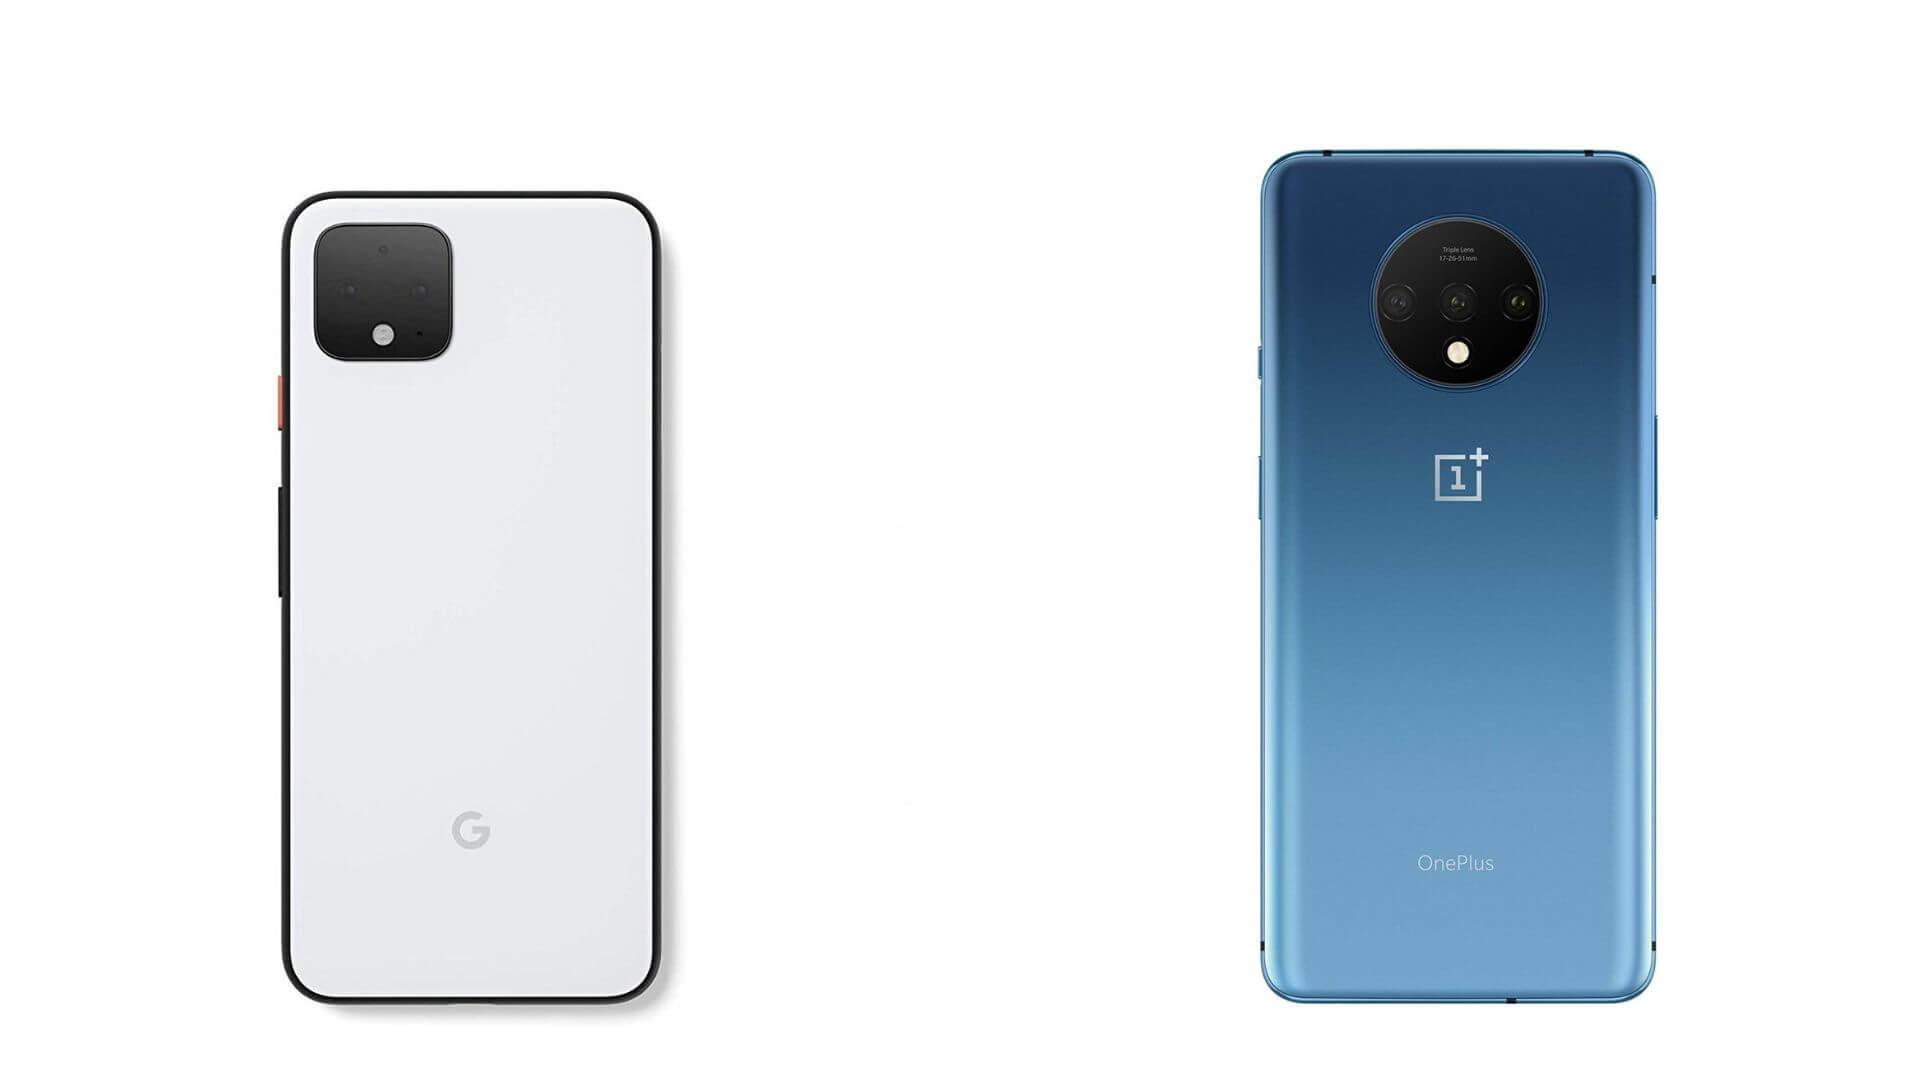 Comparison between cameras of Google Pixel 4 and OnePlus 7T